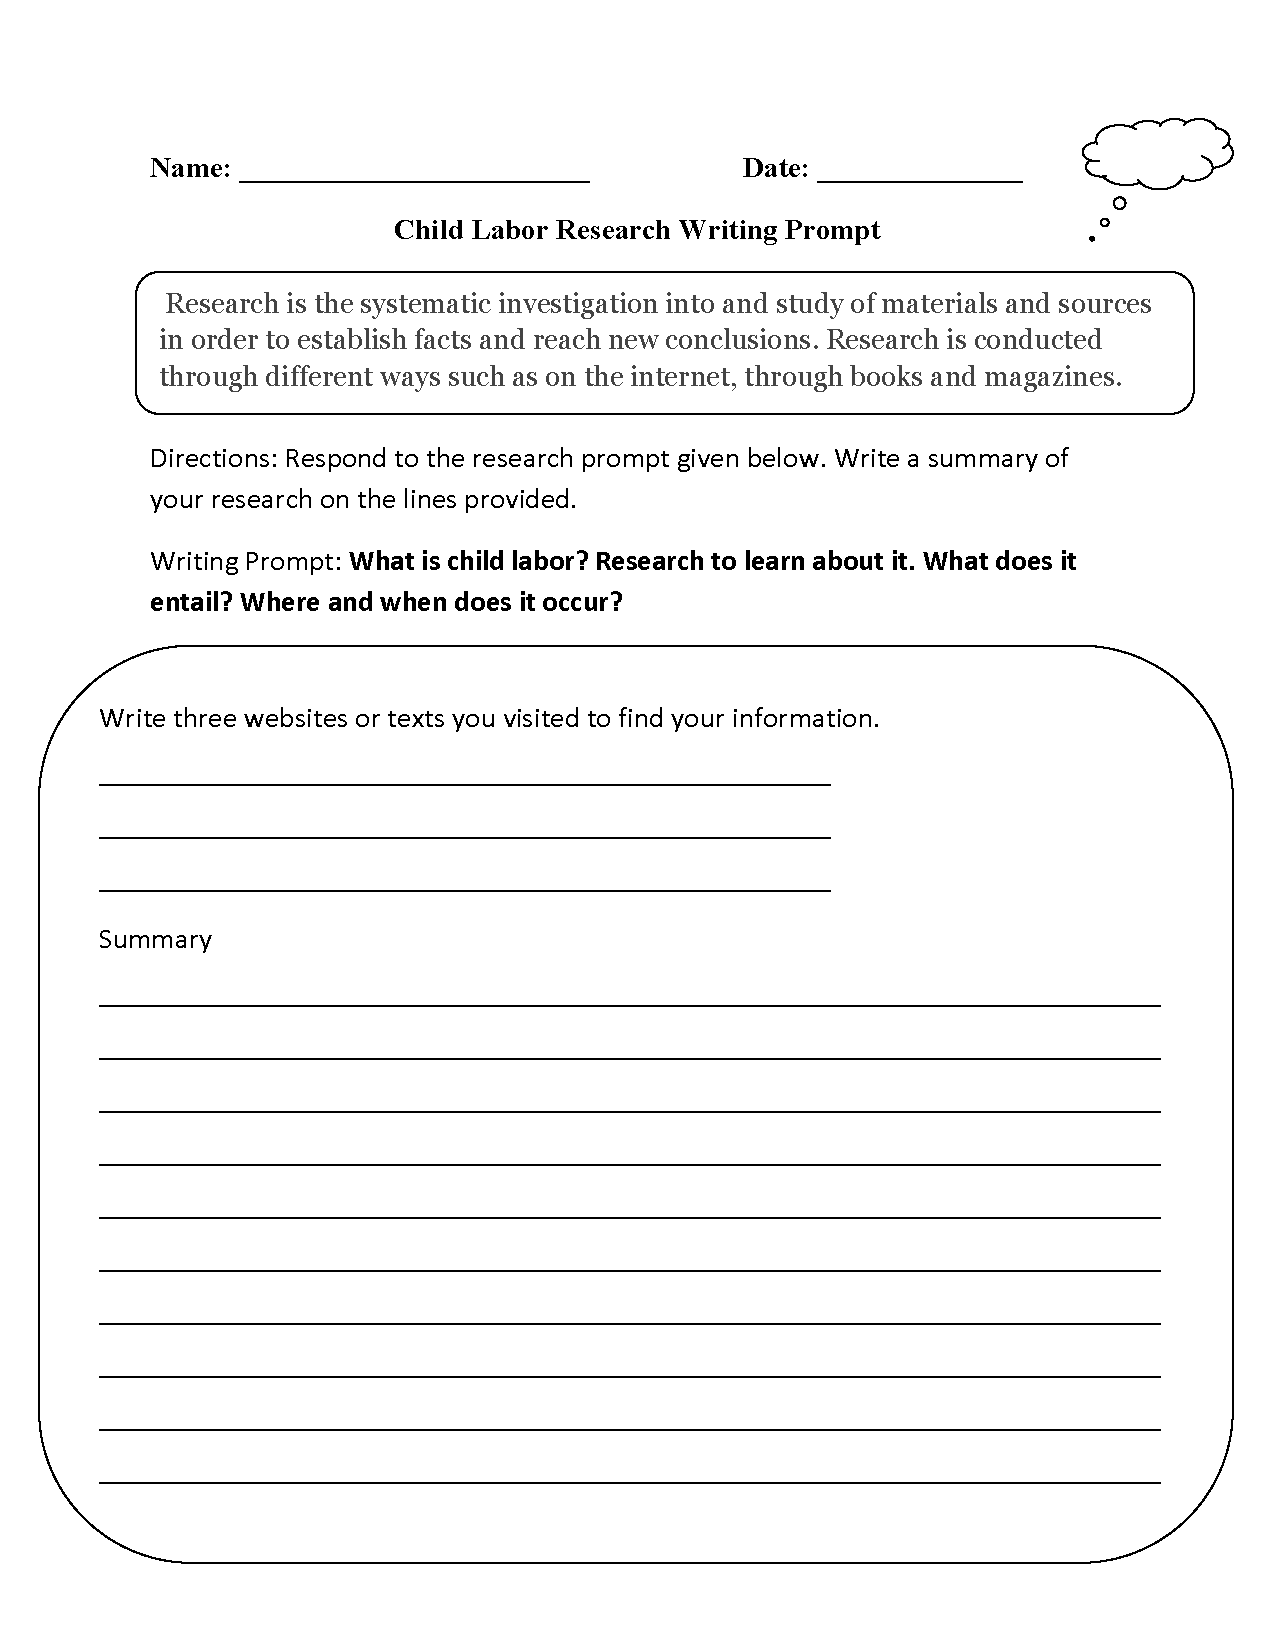 Research Child Labor Worksheet